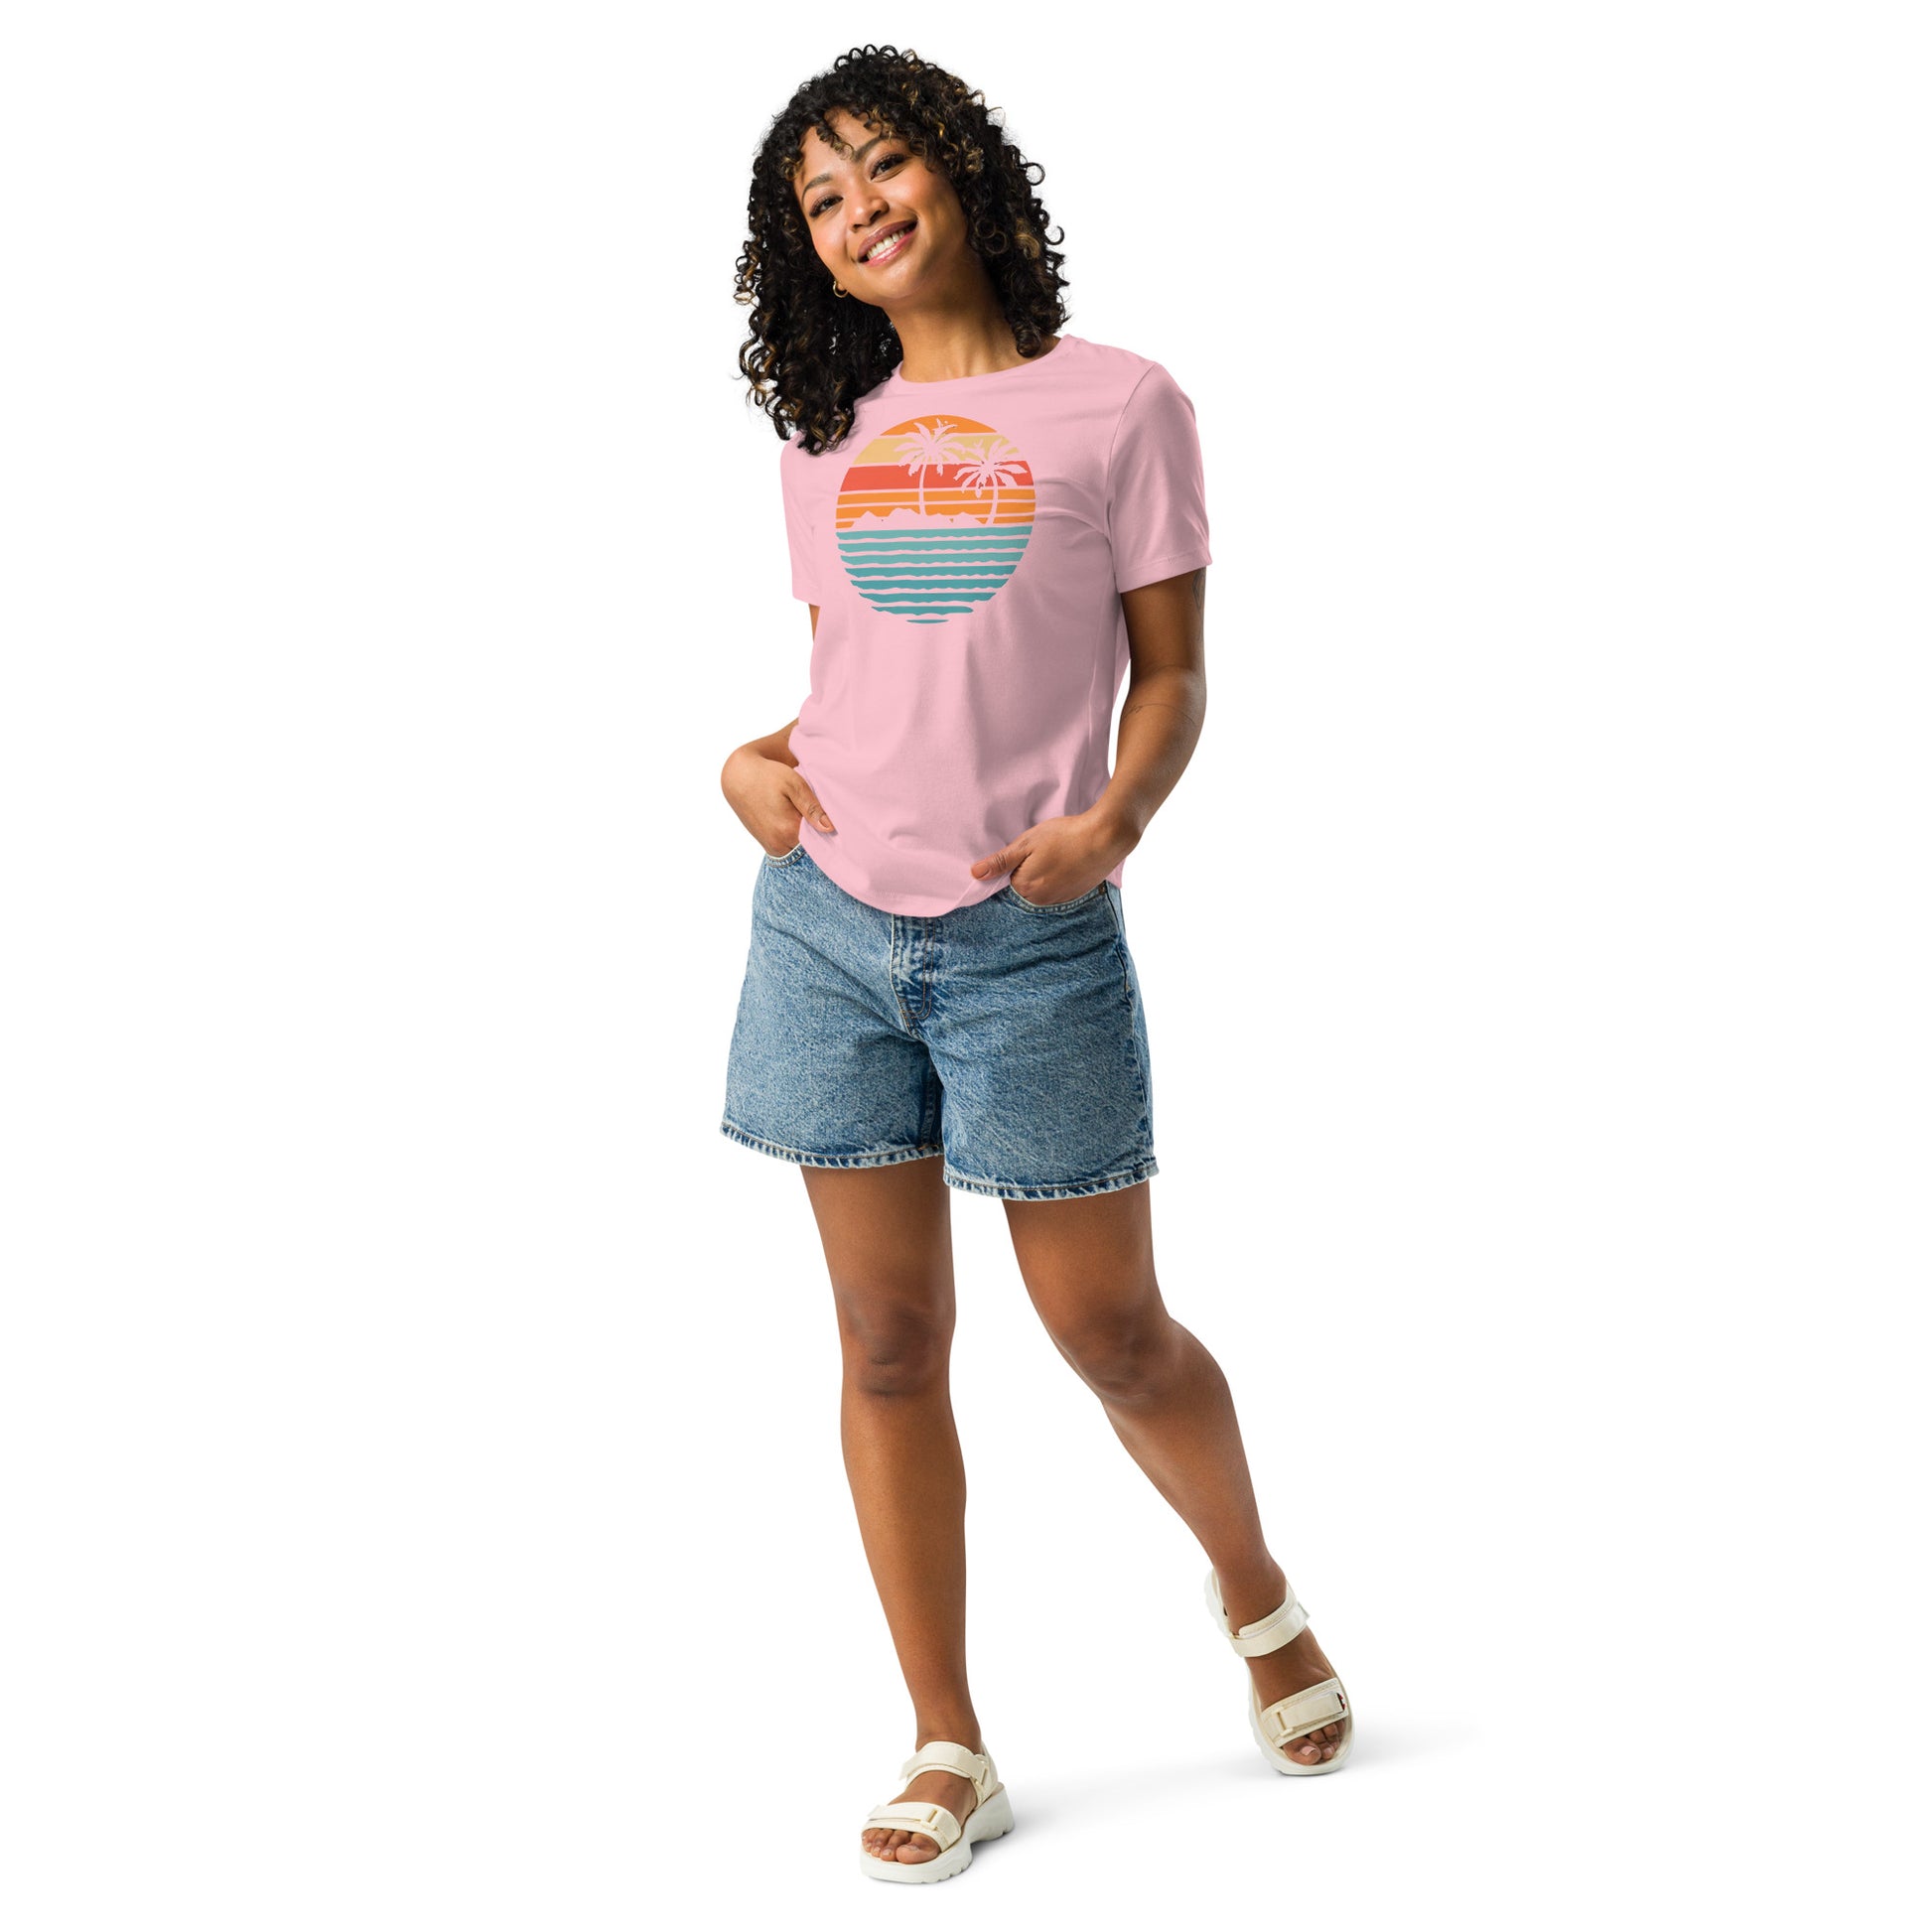 Women with pink T-shirt and a retro Island